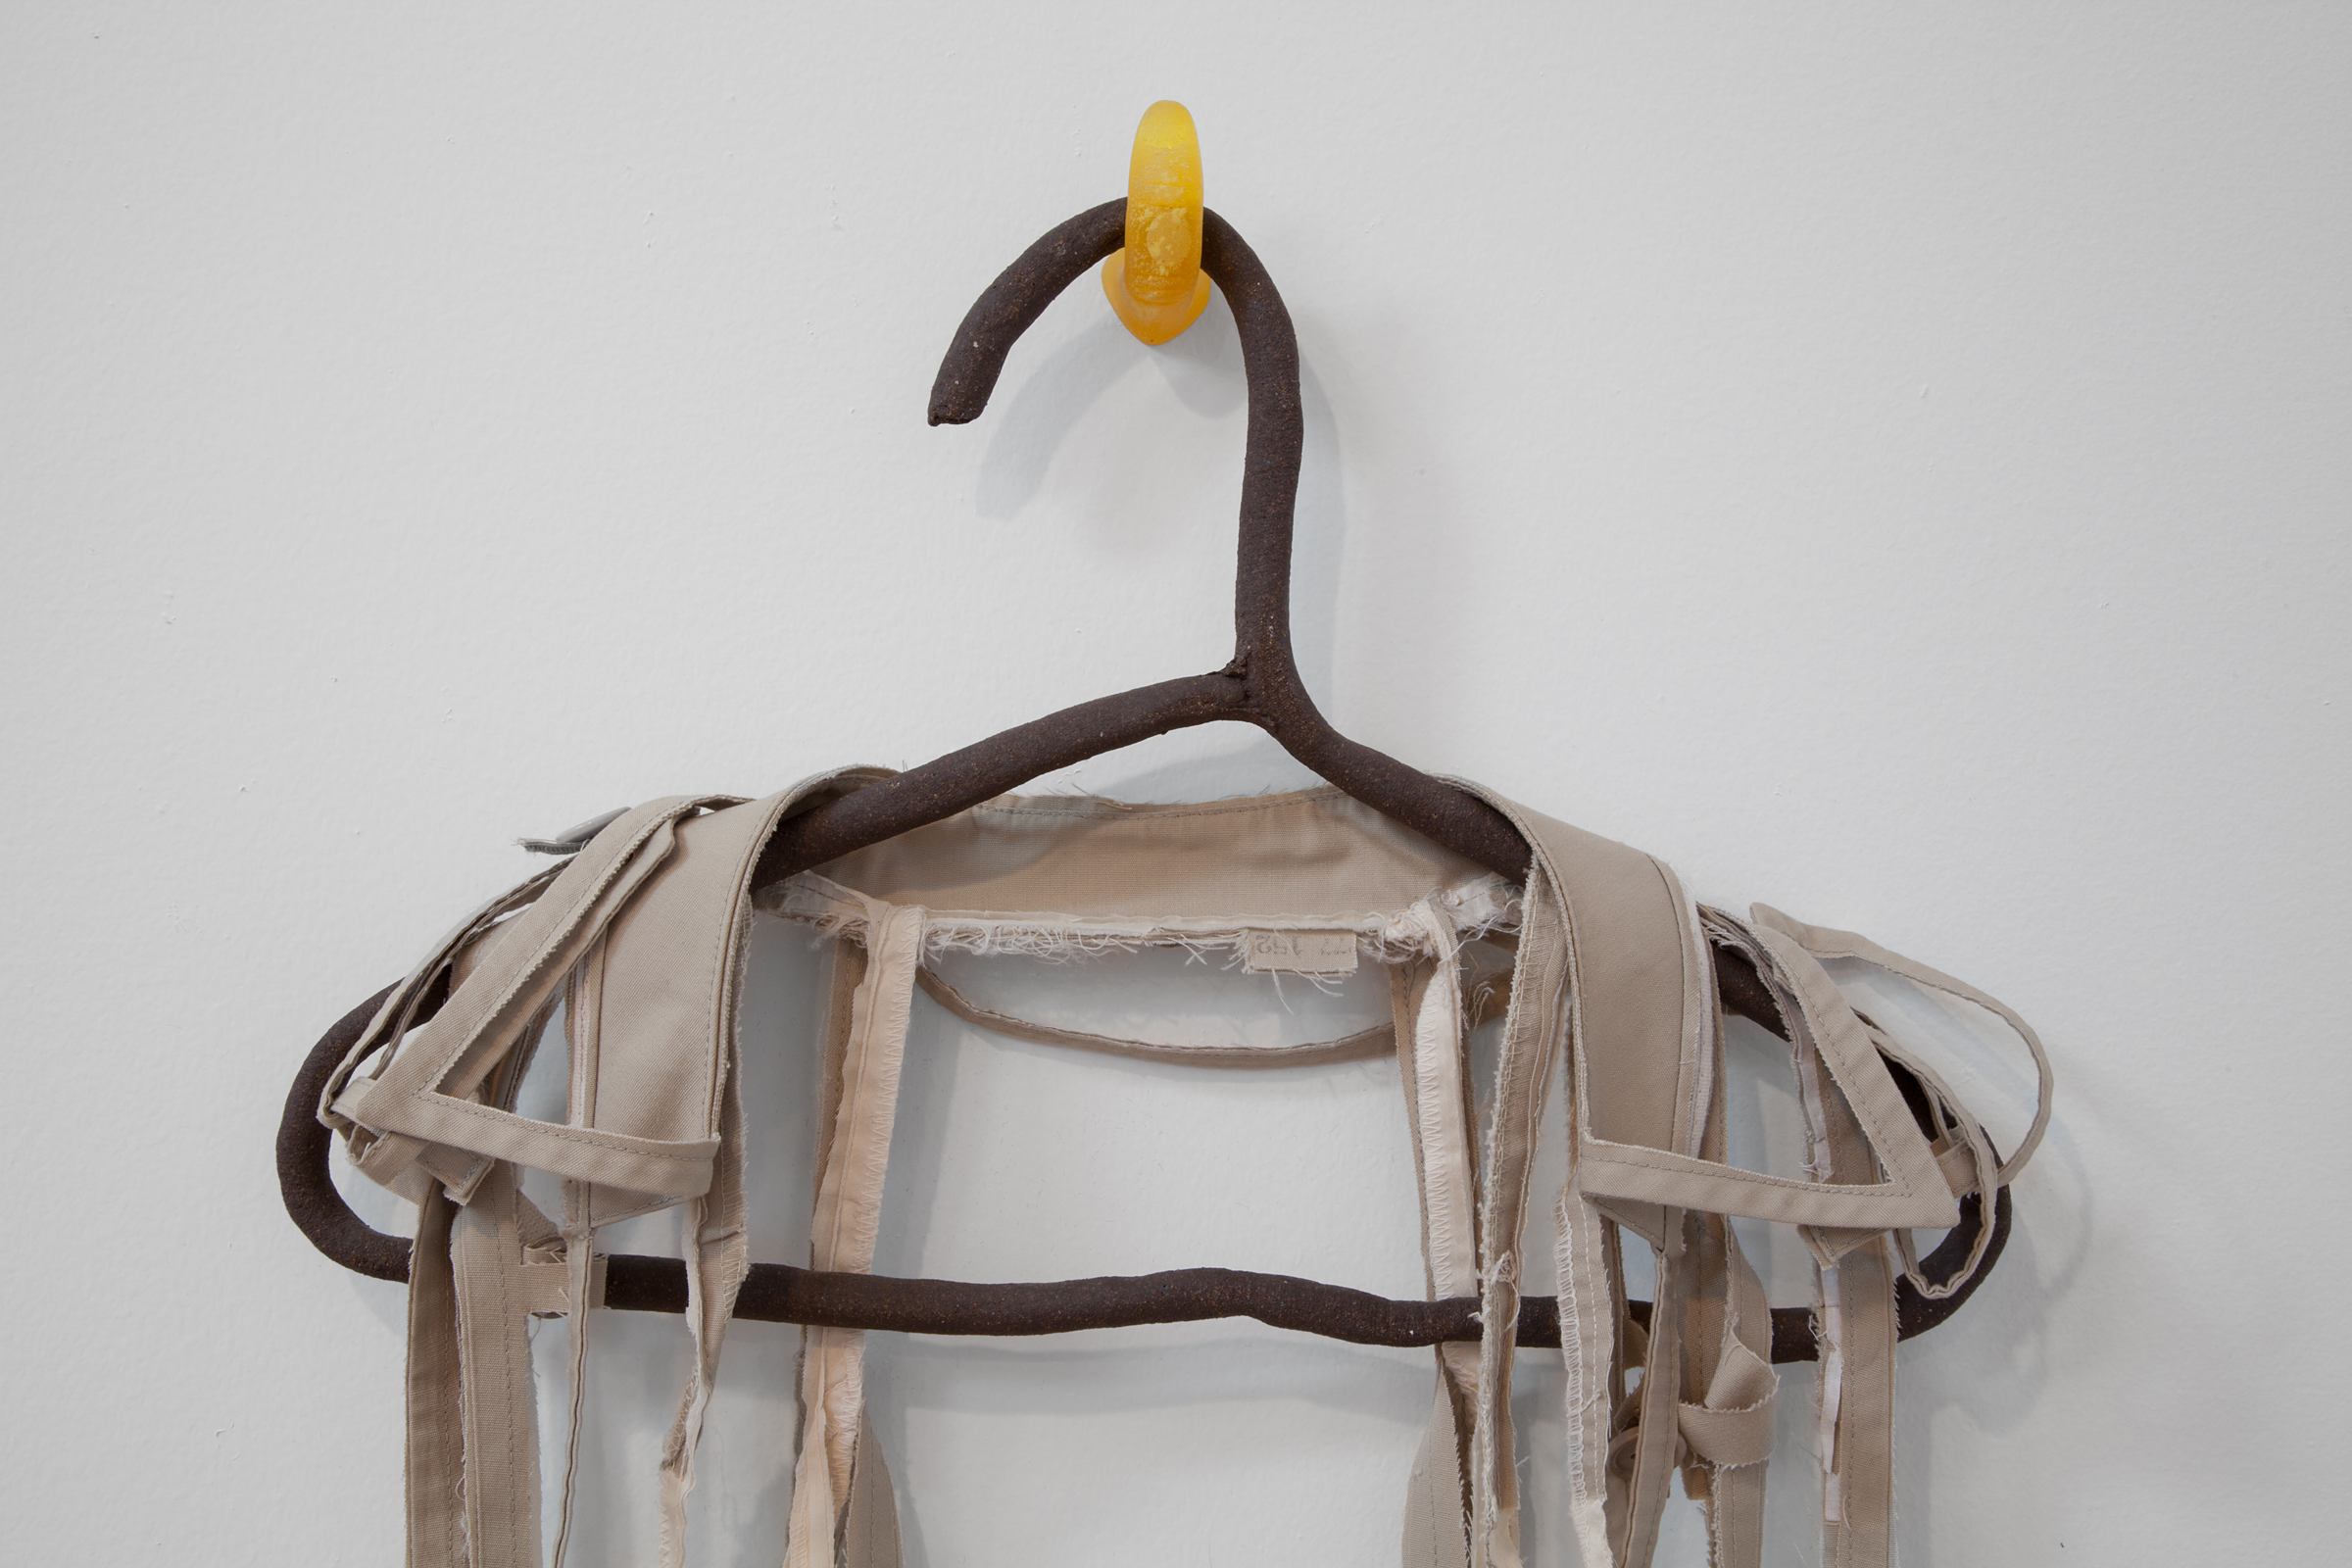   ANNA SEW HOY  (detail)&nbsp; beige/cream , fired stoneware, trench coat and resin finger hook, 55" x 17" x 3.5", 2012 